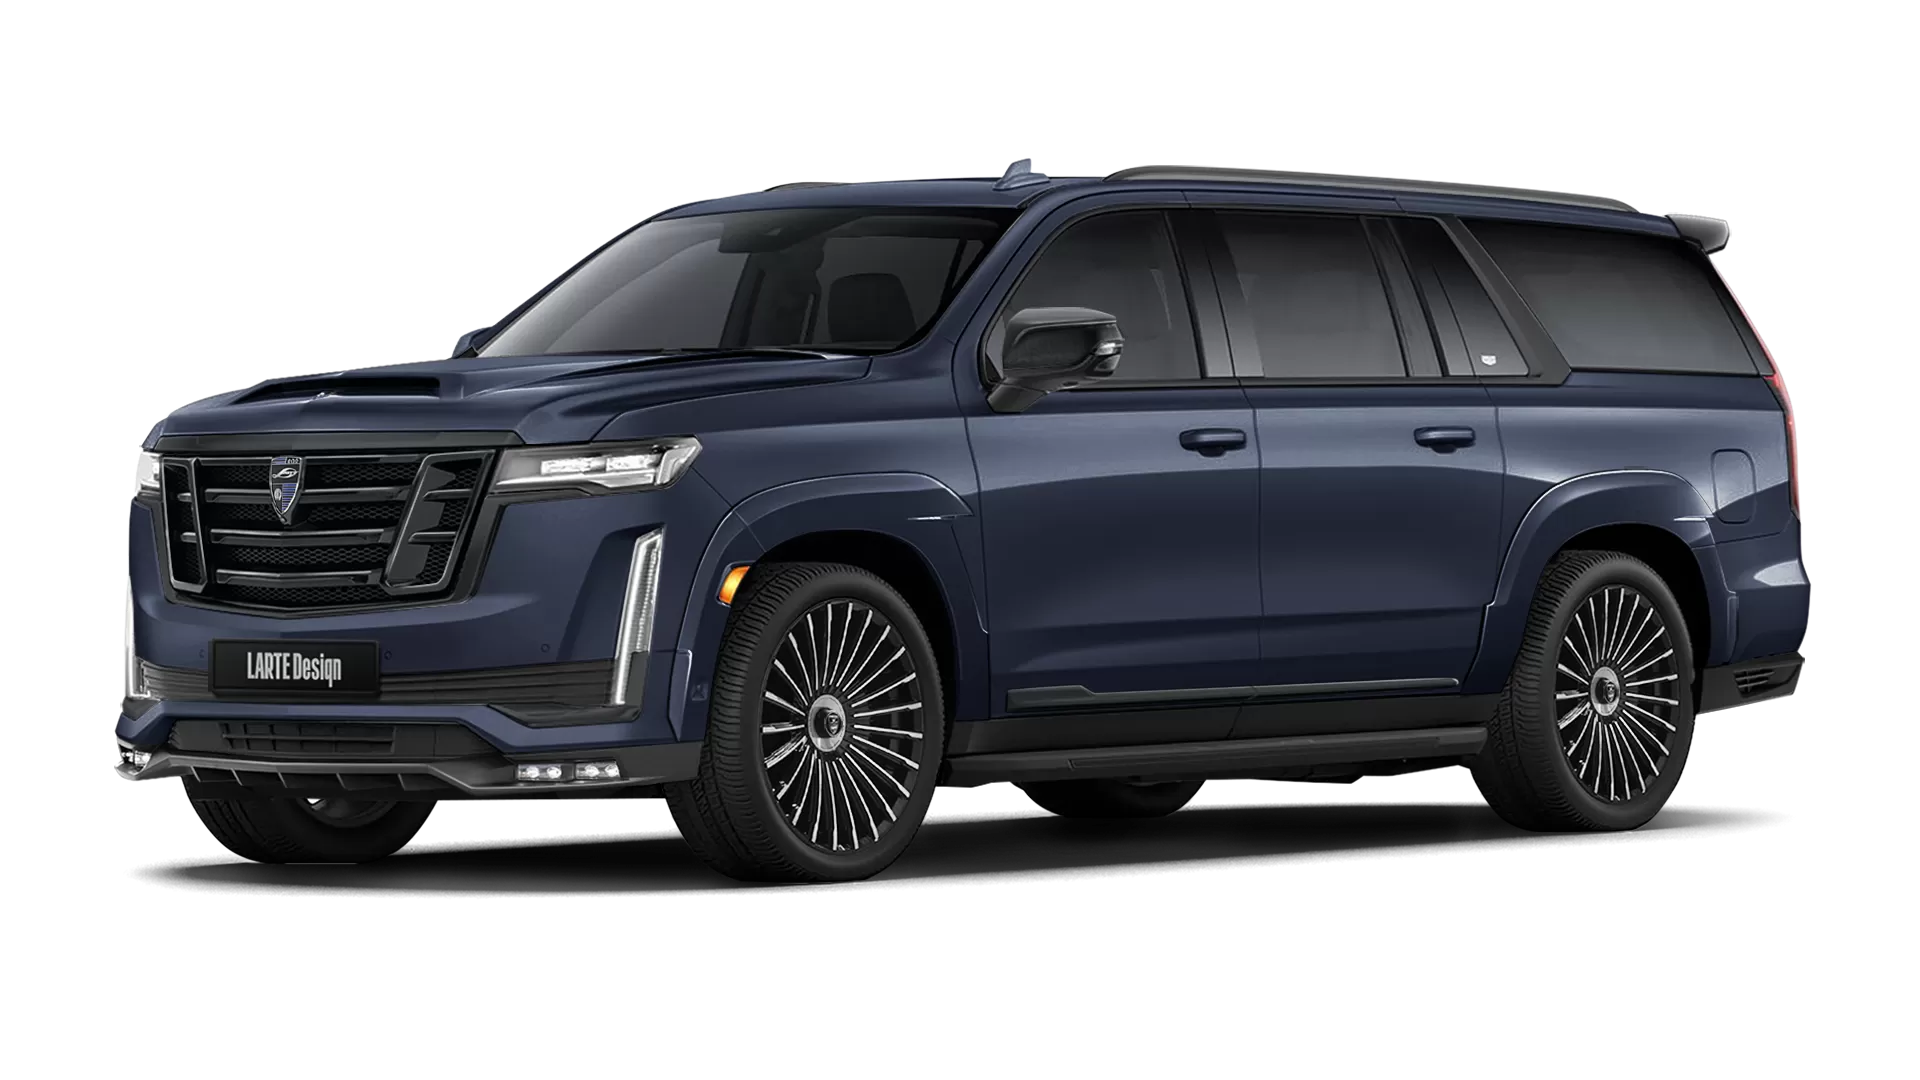 Cadillac Escalade ESV GMT 1XX with painted body kit: front view shown in Dark Moon Blue